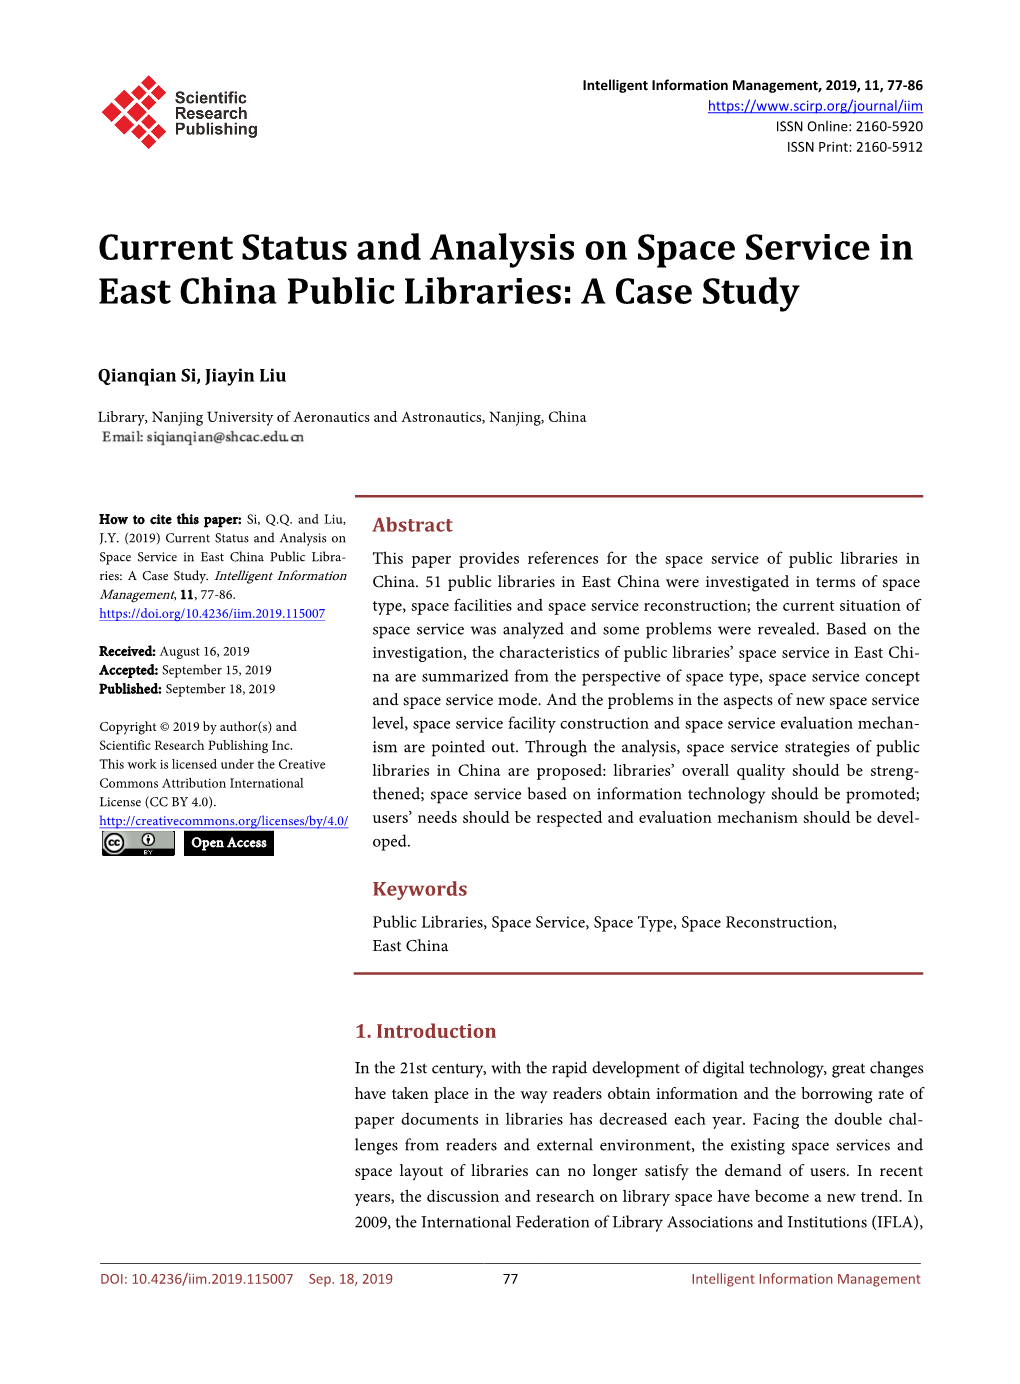 Current Status and Analysis on Space Service in East China Public Libraries: a Case Study